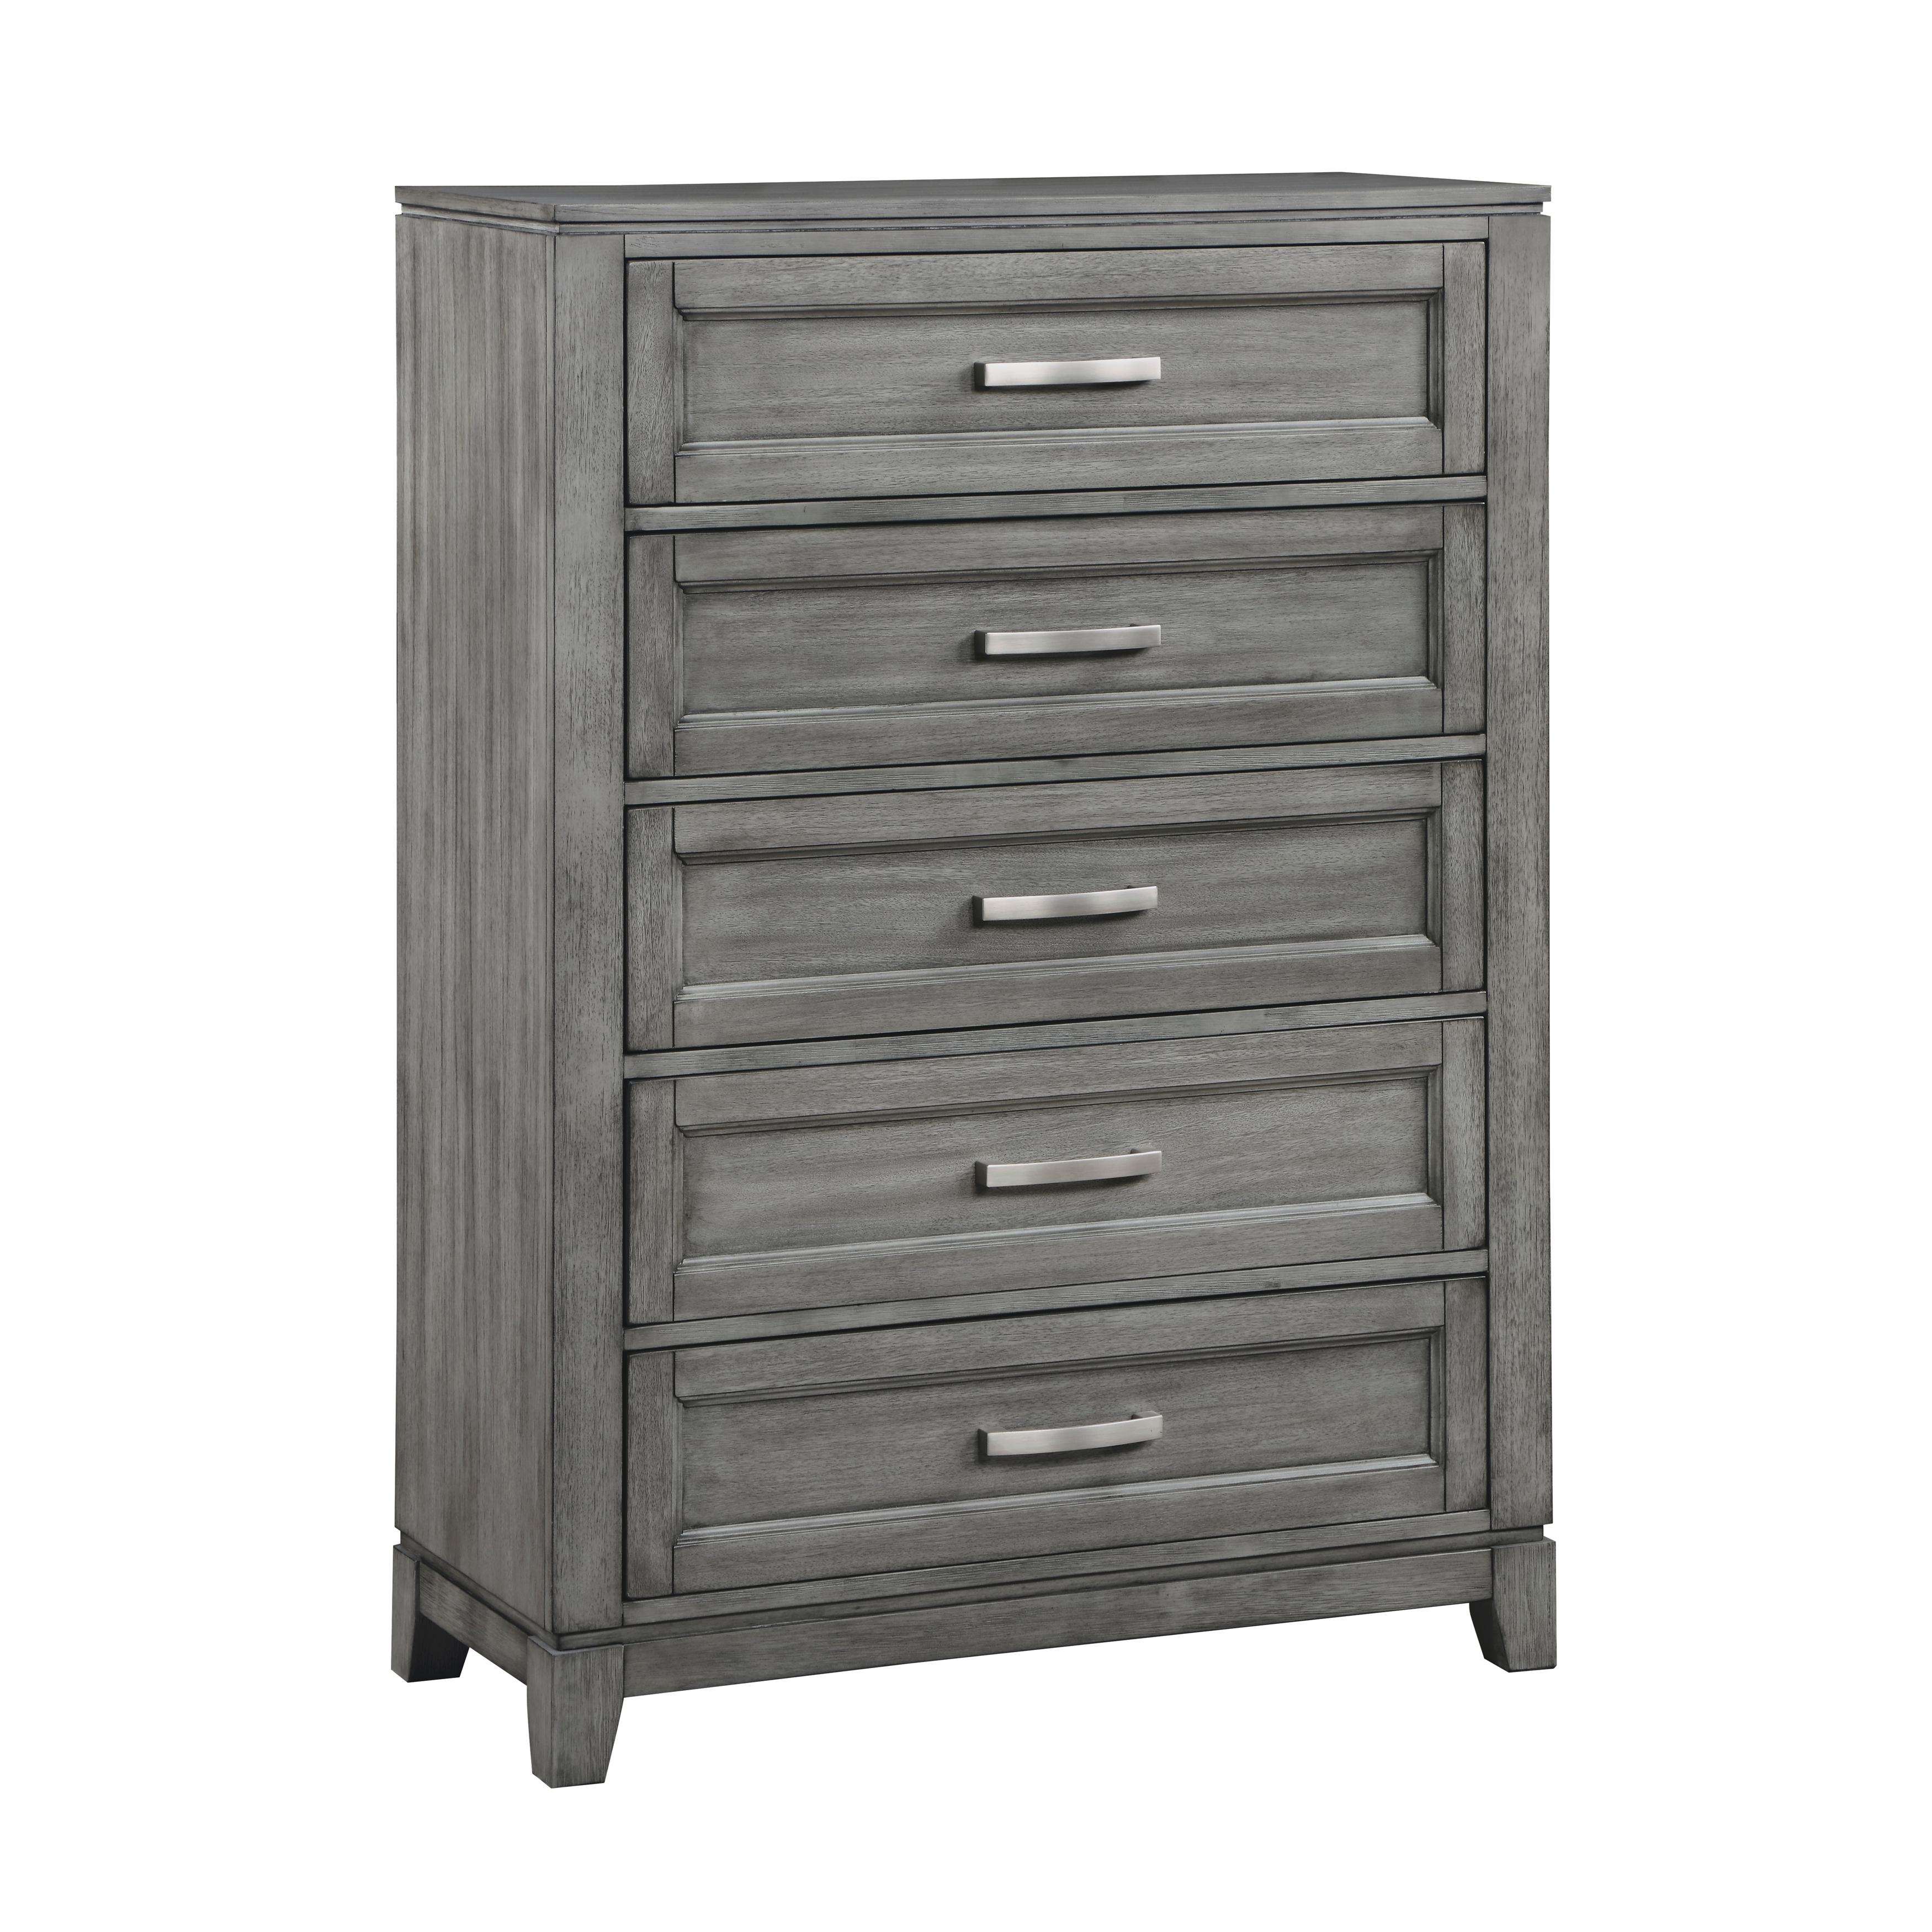 Transitional, Rustic Chest Garretson Chest 1450-9-C 1450-9-C in Gray 